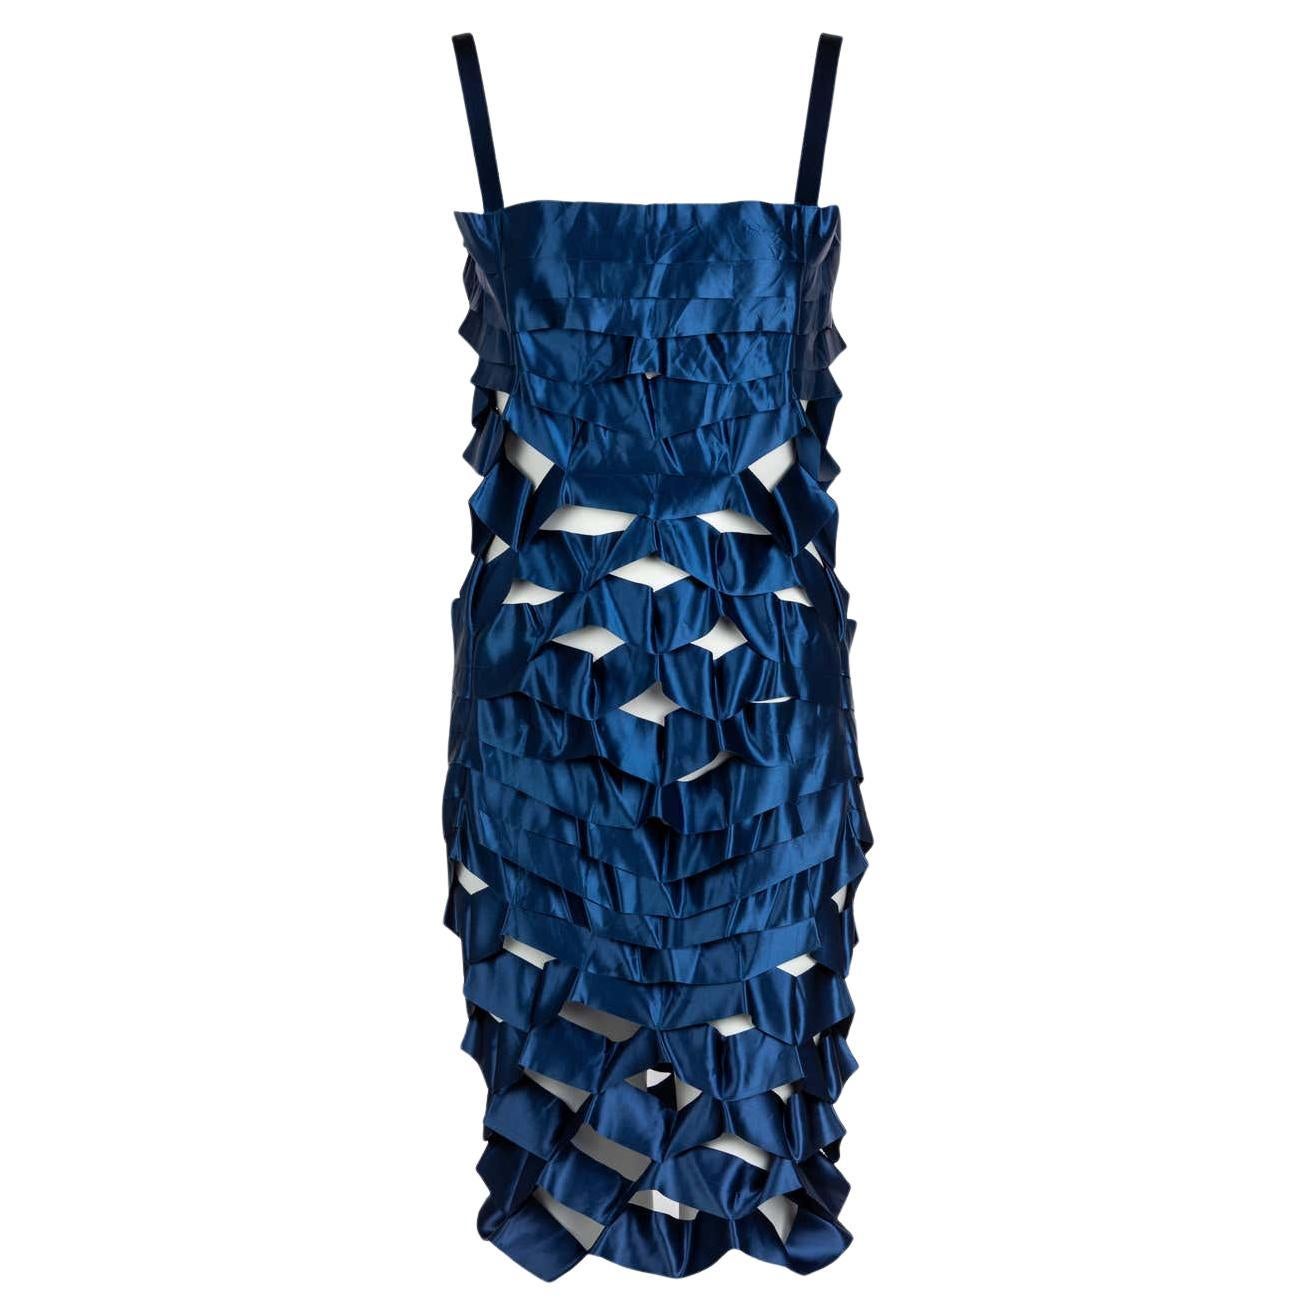 Issey Miyake Sapphire Japanese Blue Satin Ribbon Cage Dress, 1990s For Sale